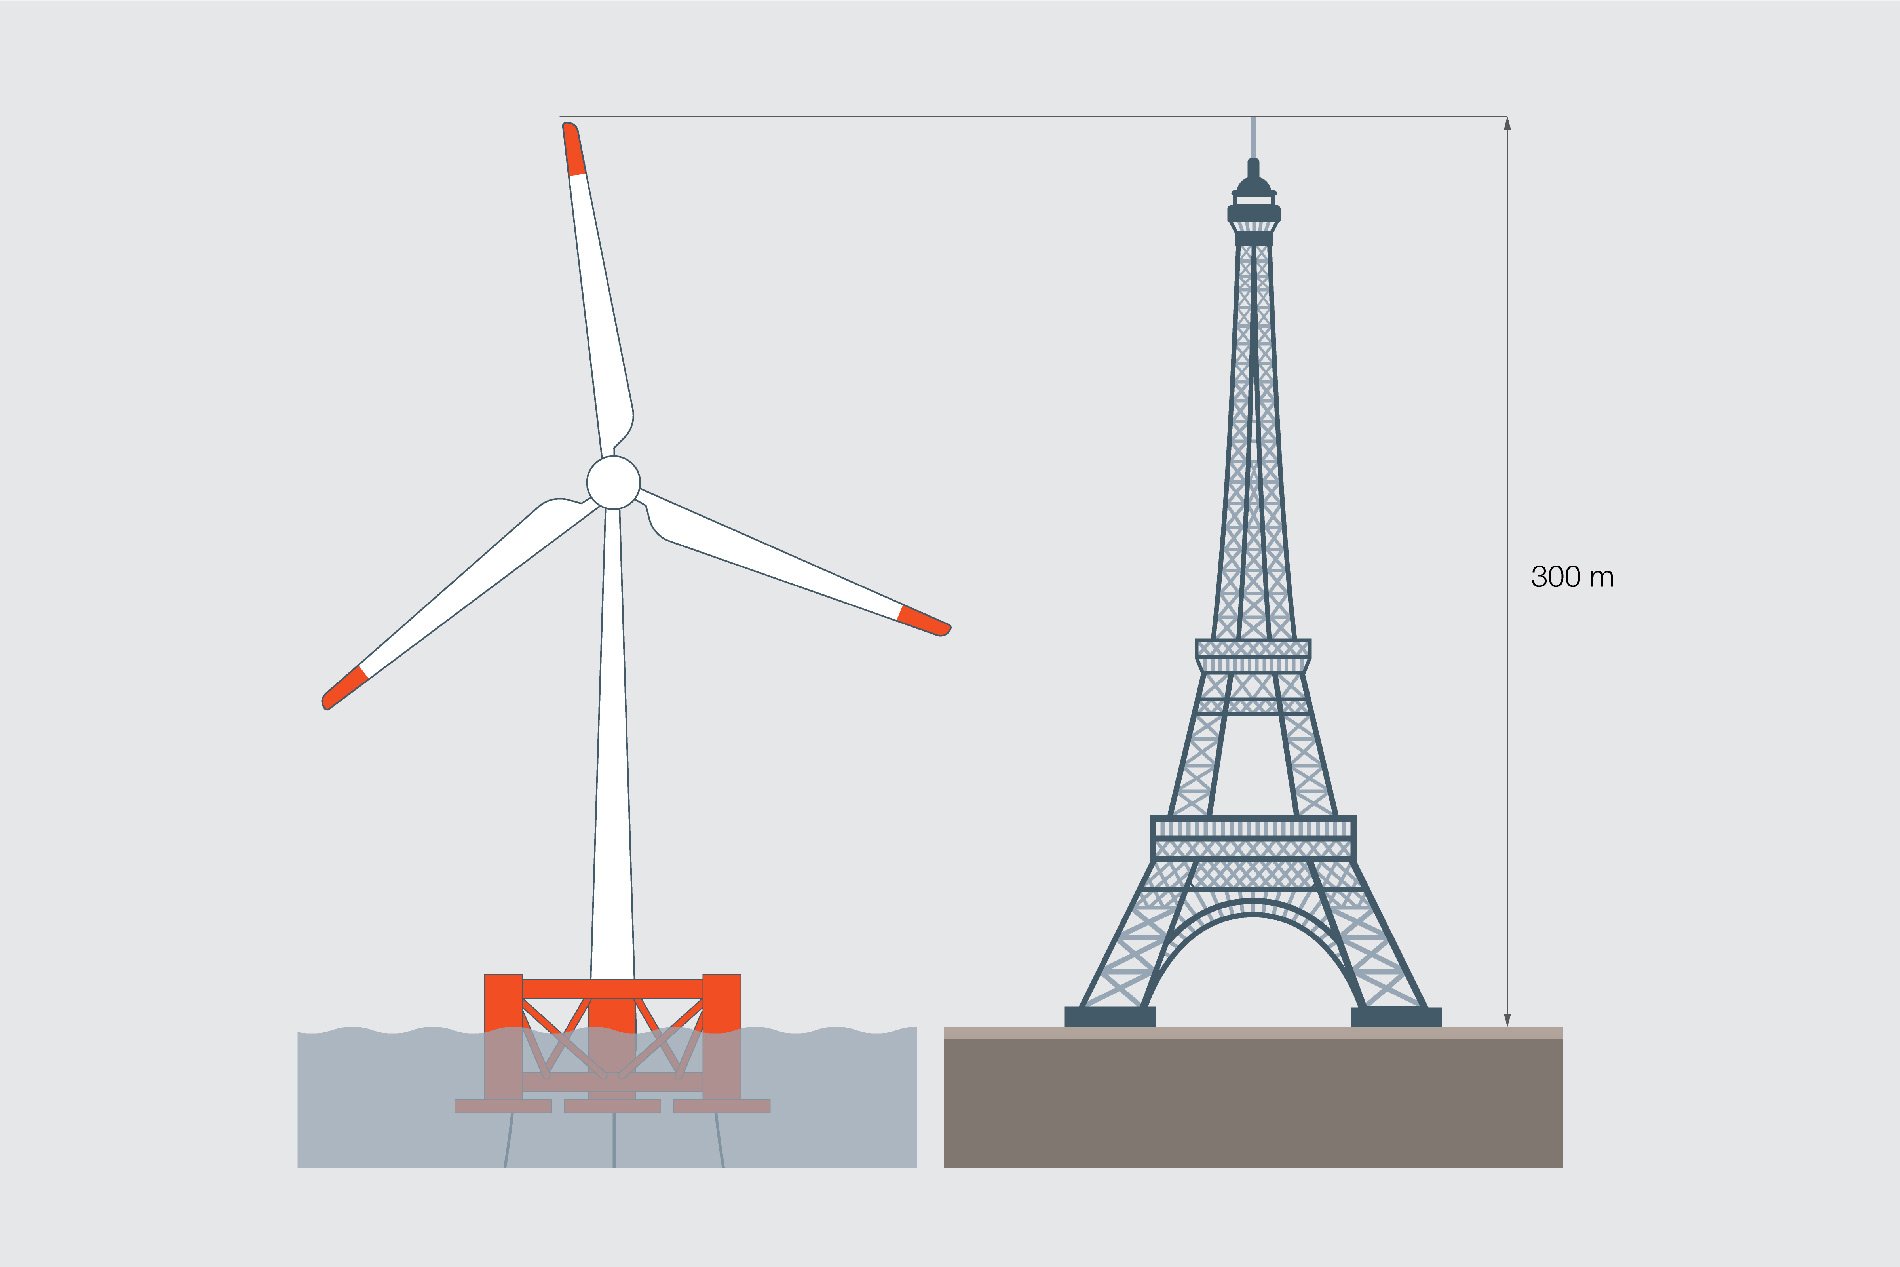 windmill comparison with Eiffer tower